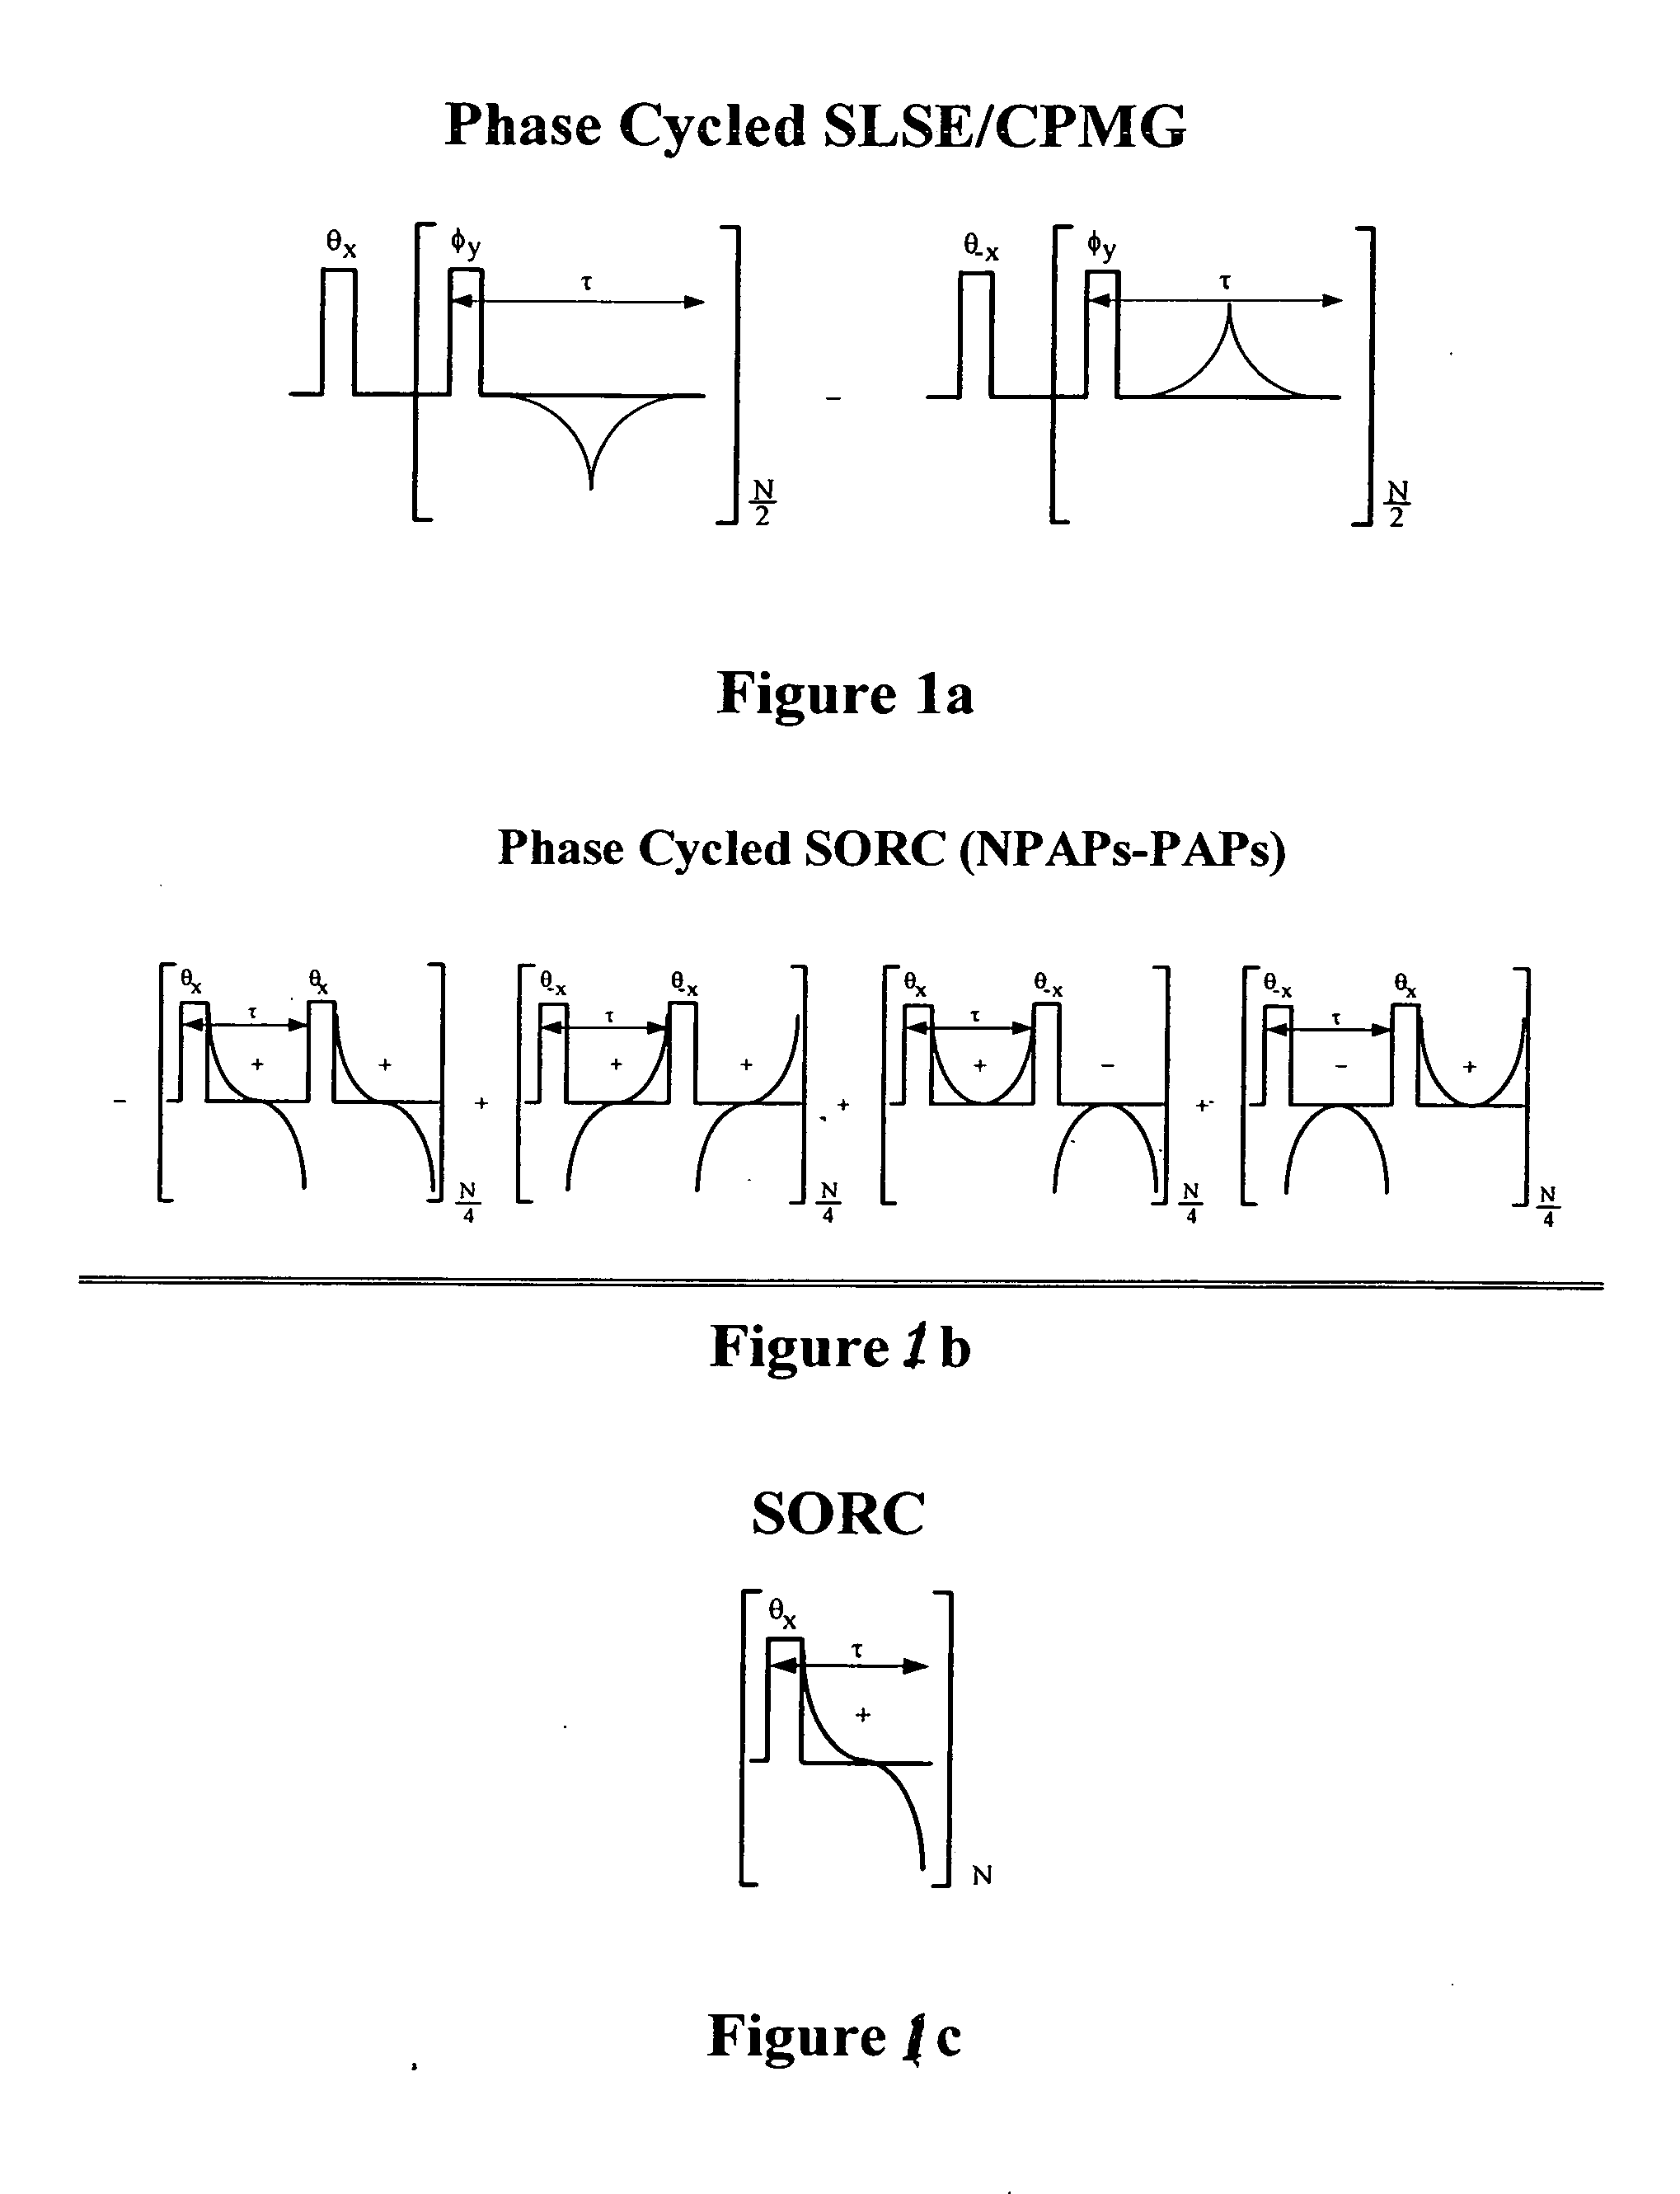 Method and apparatus for detection of quadrupole nuclei in motion relative to the search region